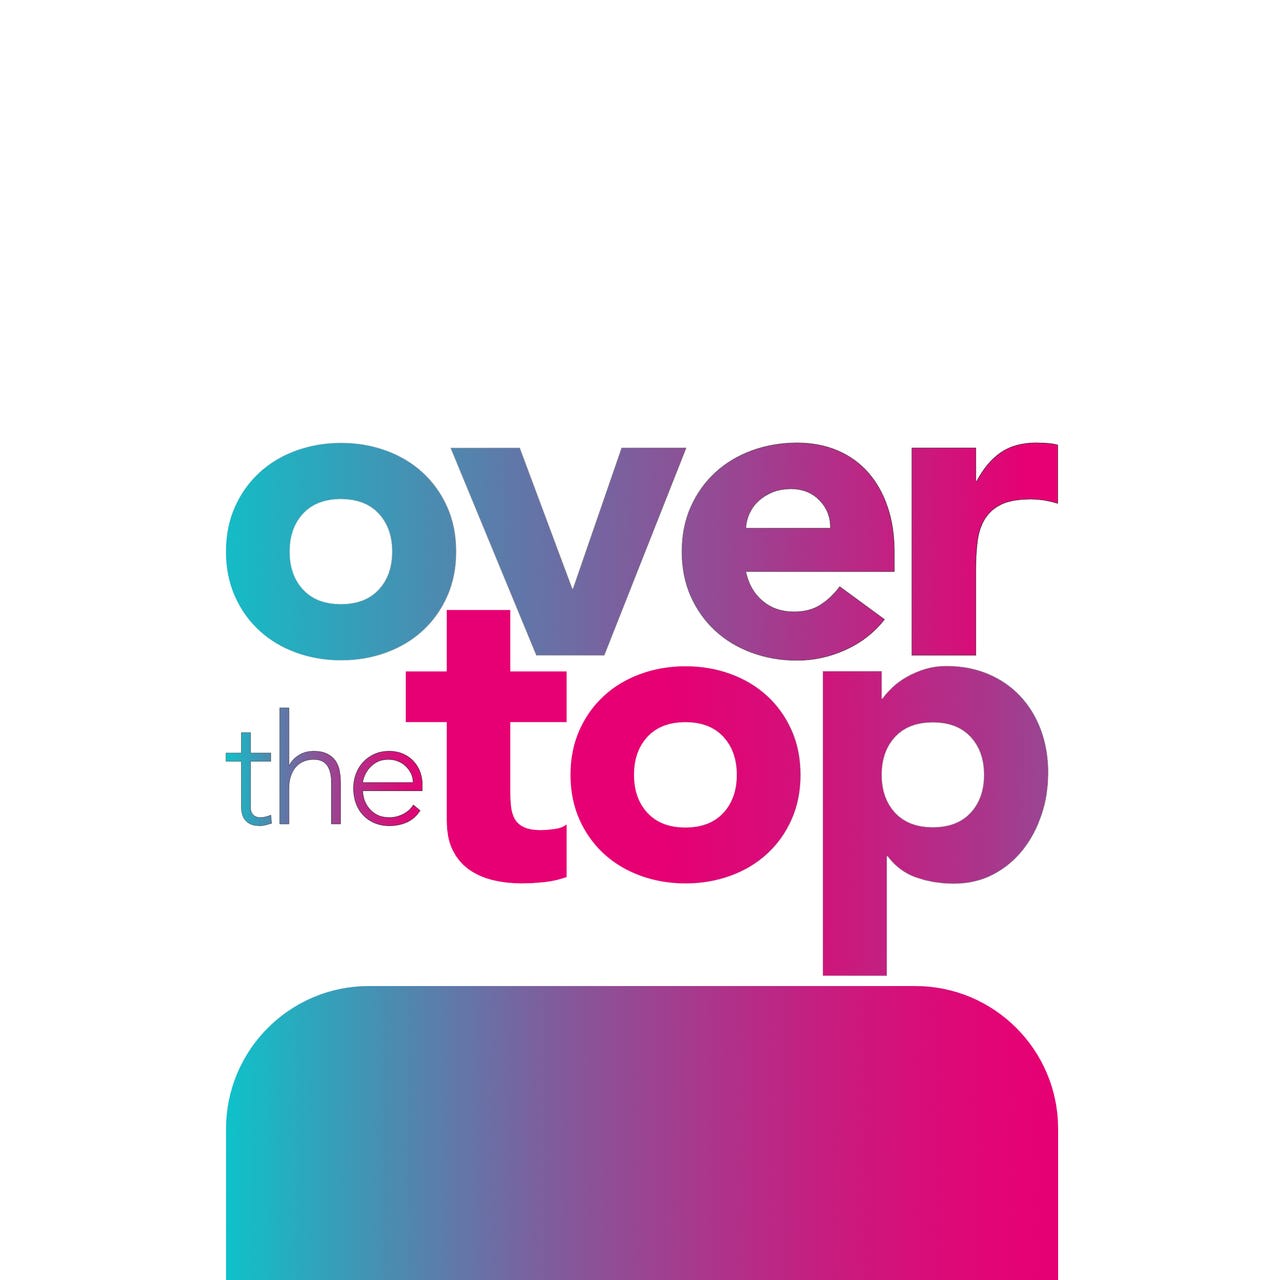 Over the Top